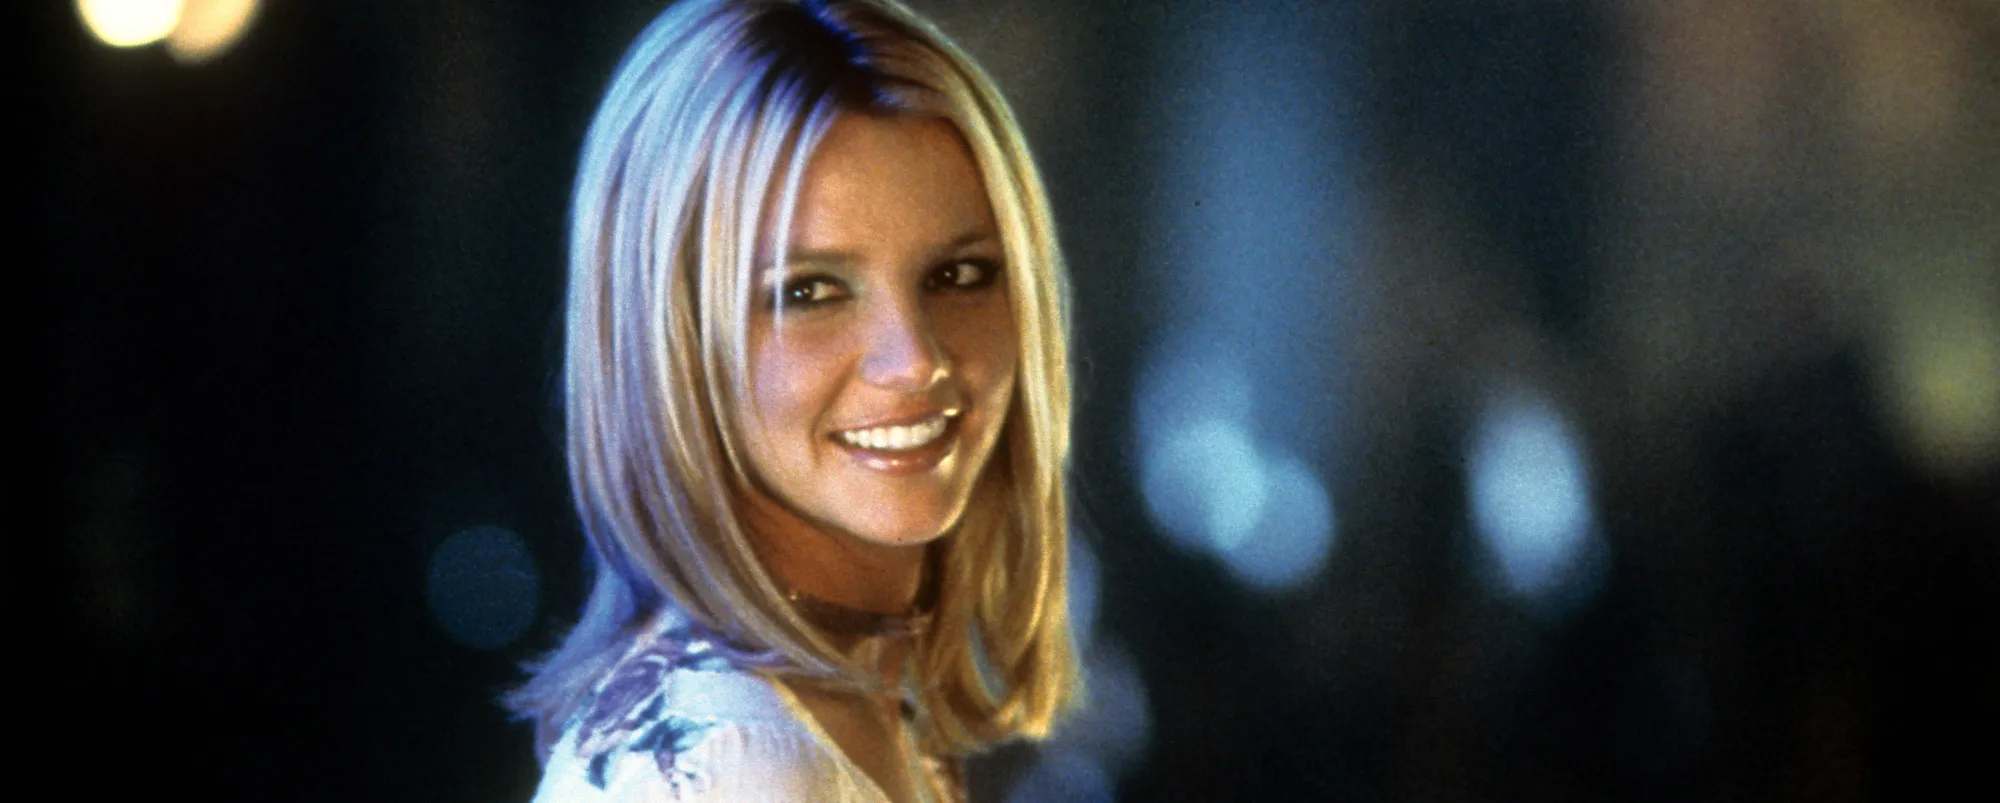 4 Hit Songs You Didn’t Know Britney Spears Wrote in the 21st Century